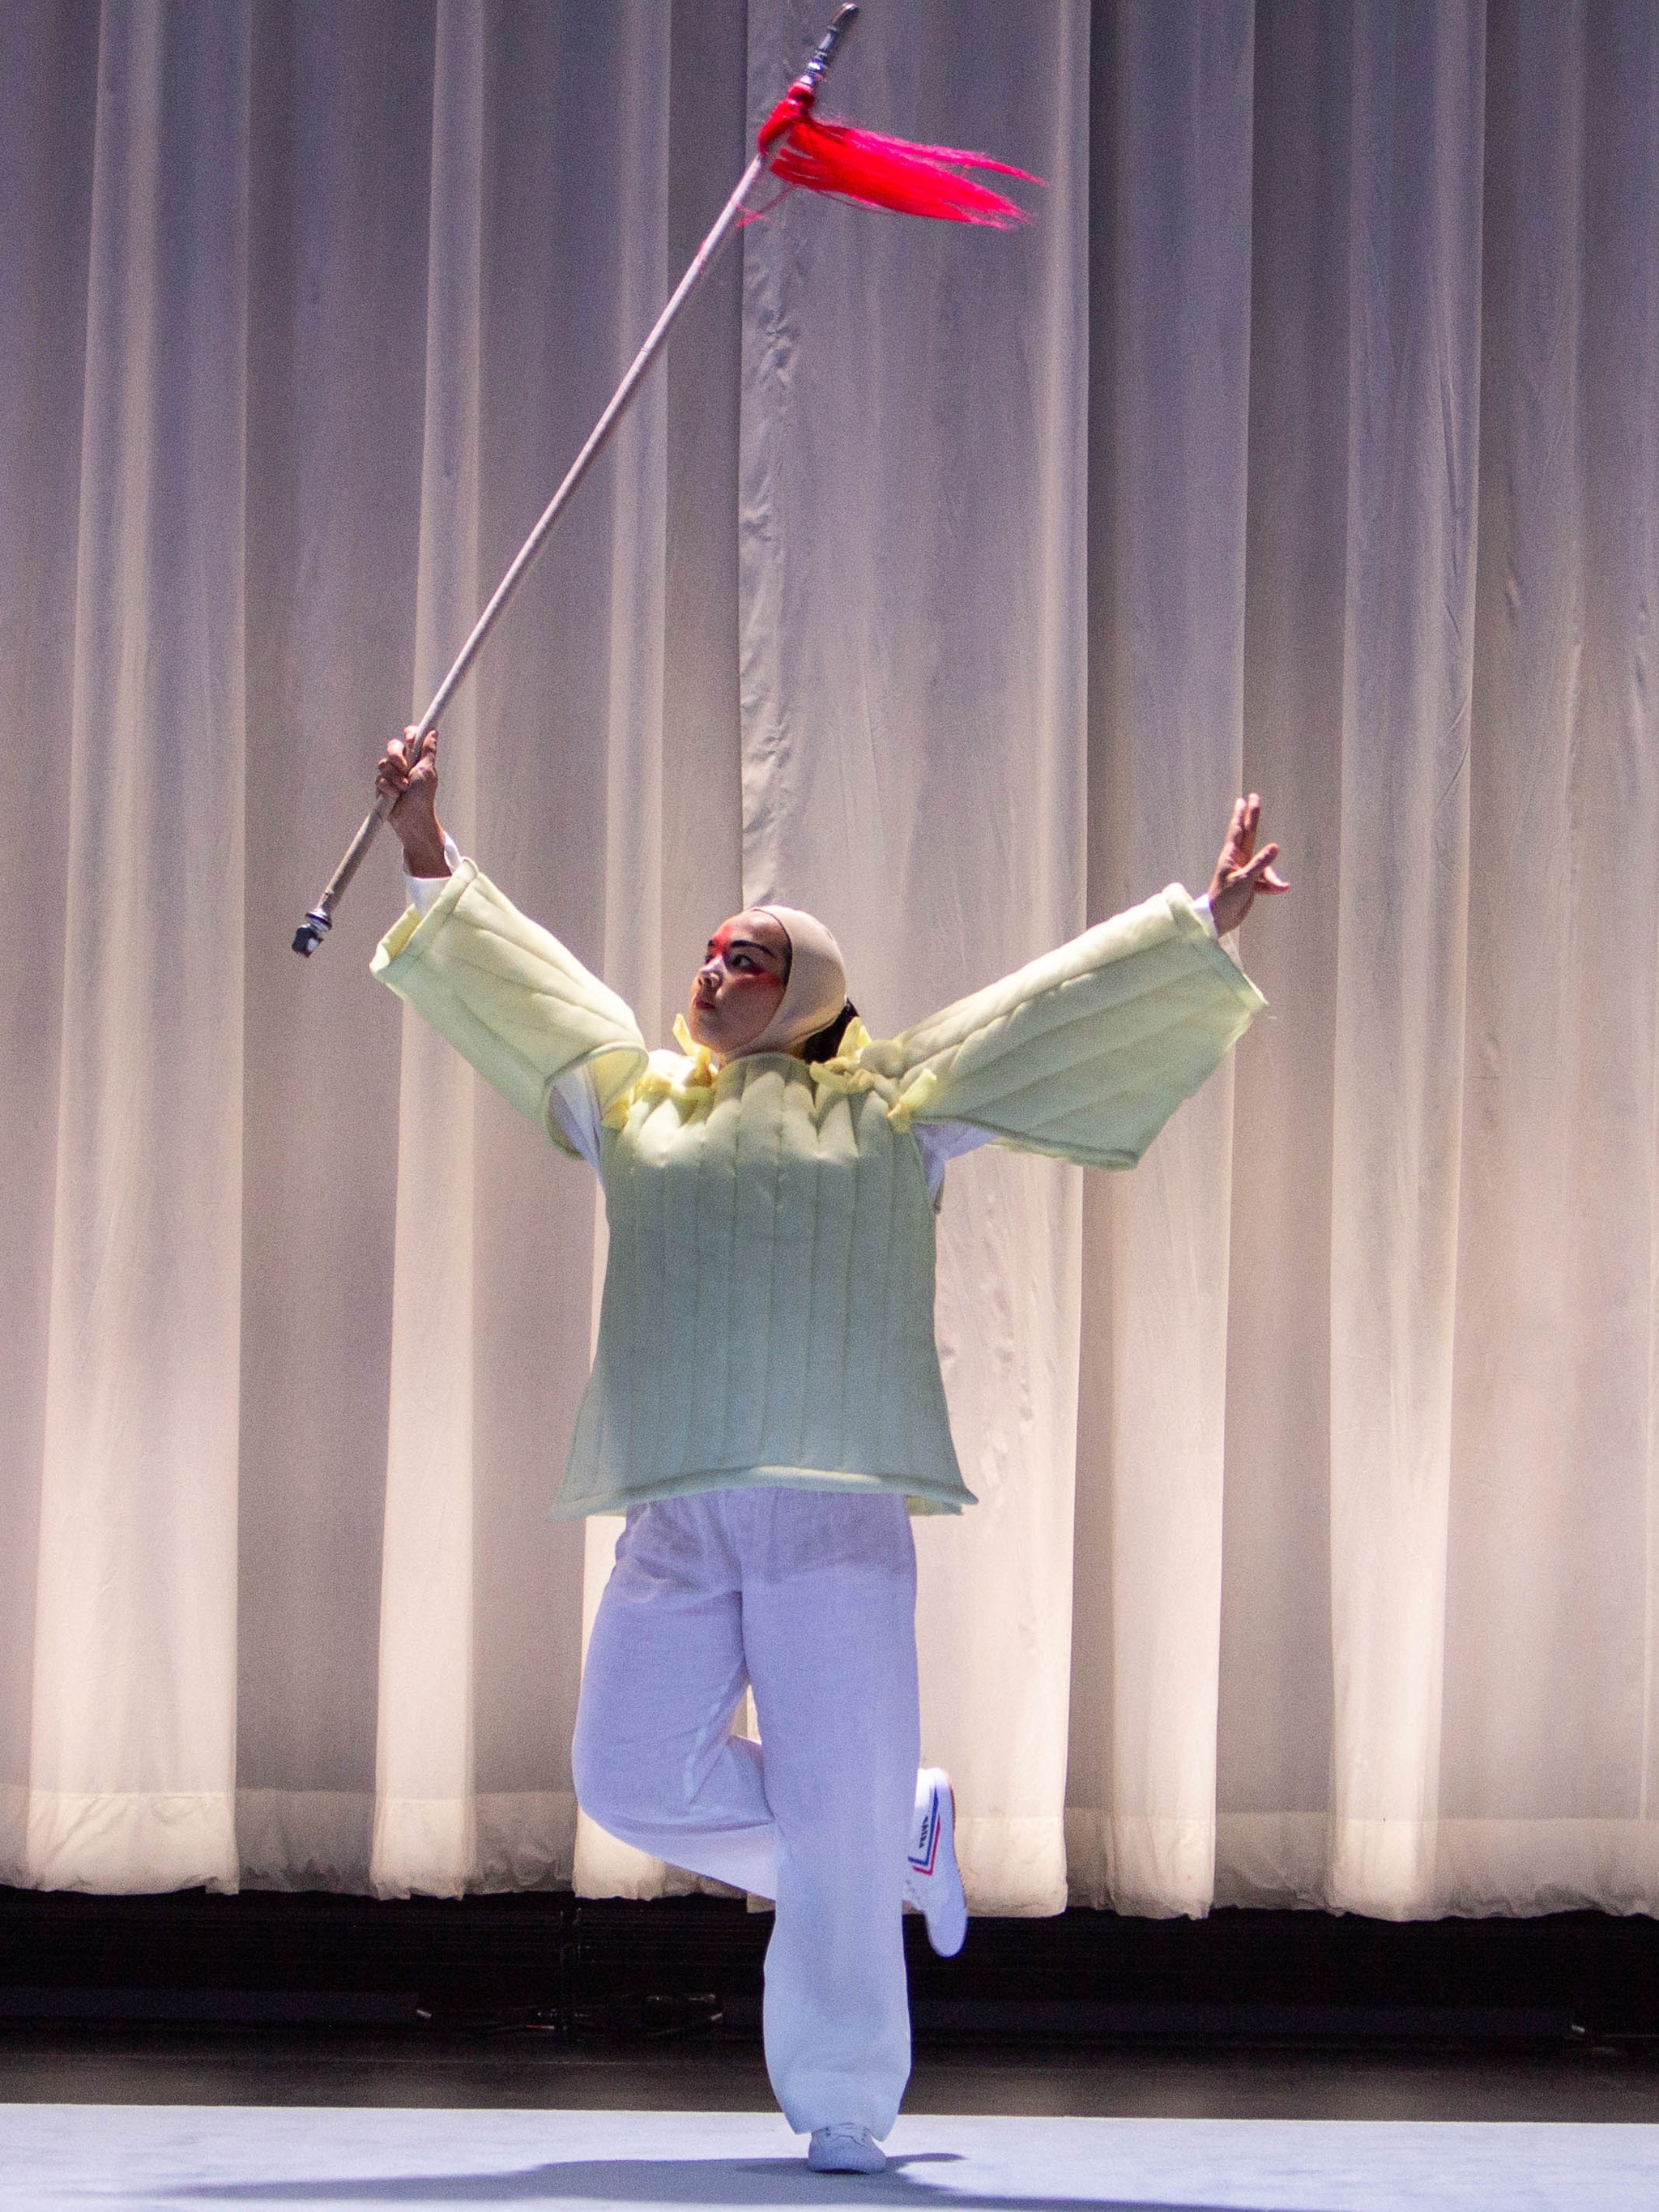 A dancer wearing a structured, loose fitting yellow top and baggy white pants stands with arms outstretched. She is looking upward and holding a pole-like staff above her head. The tip of the staff is tied with a small red flag.